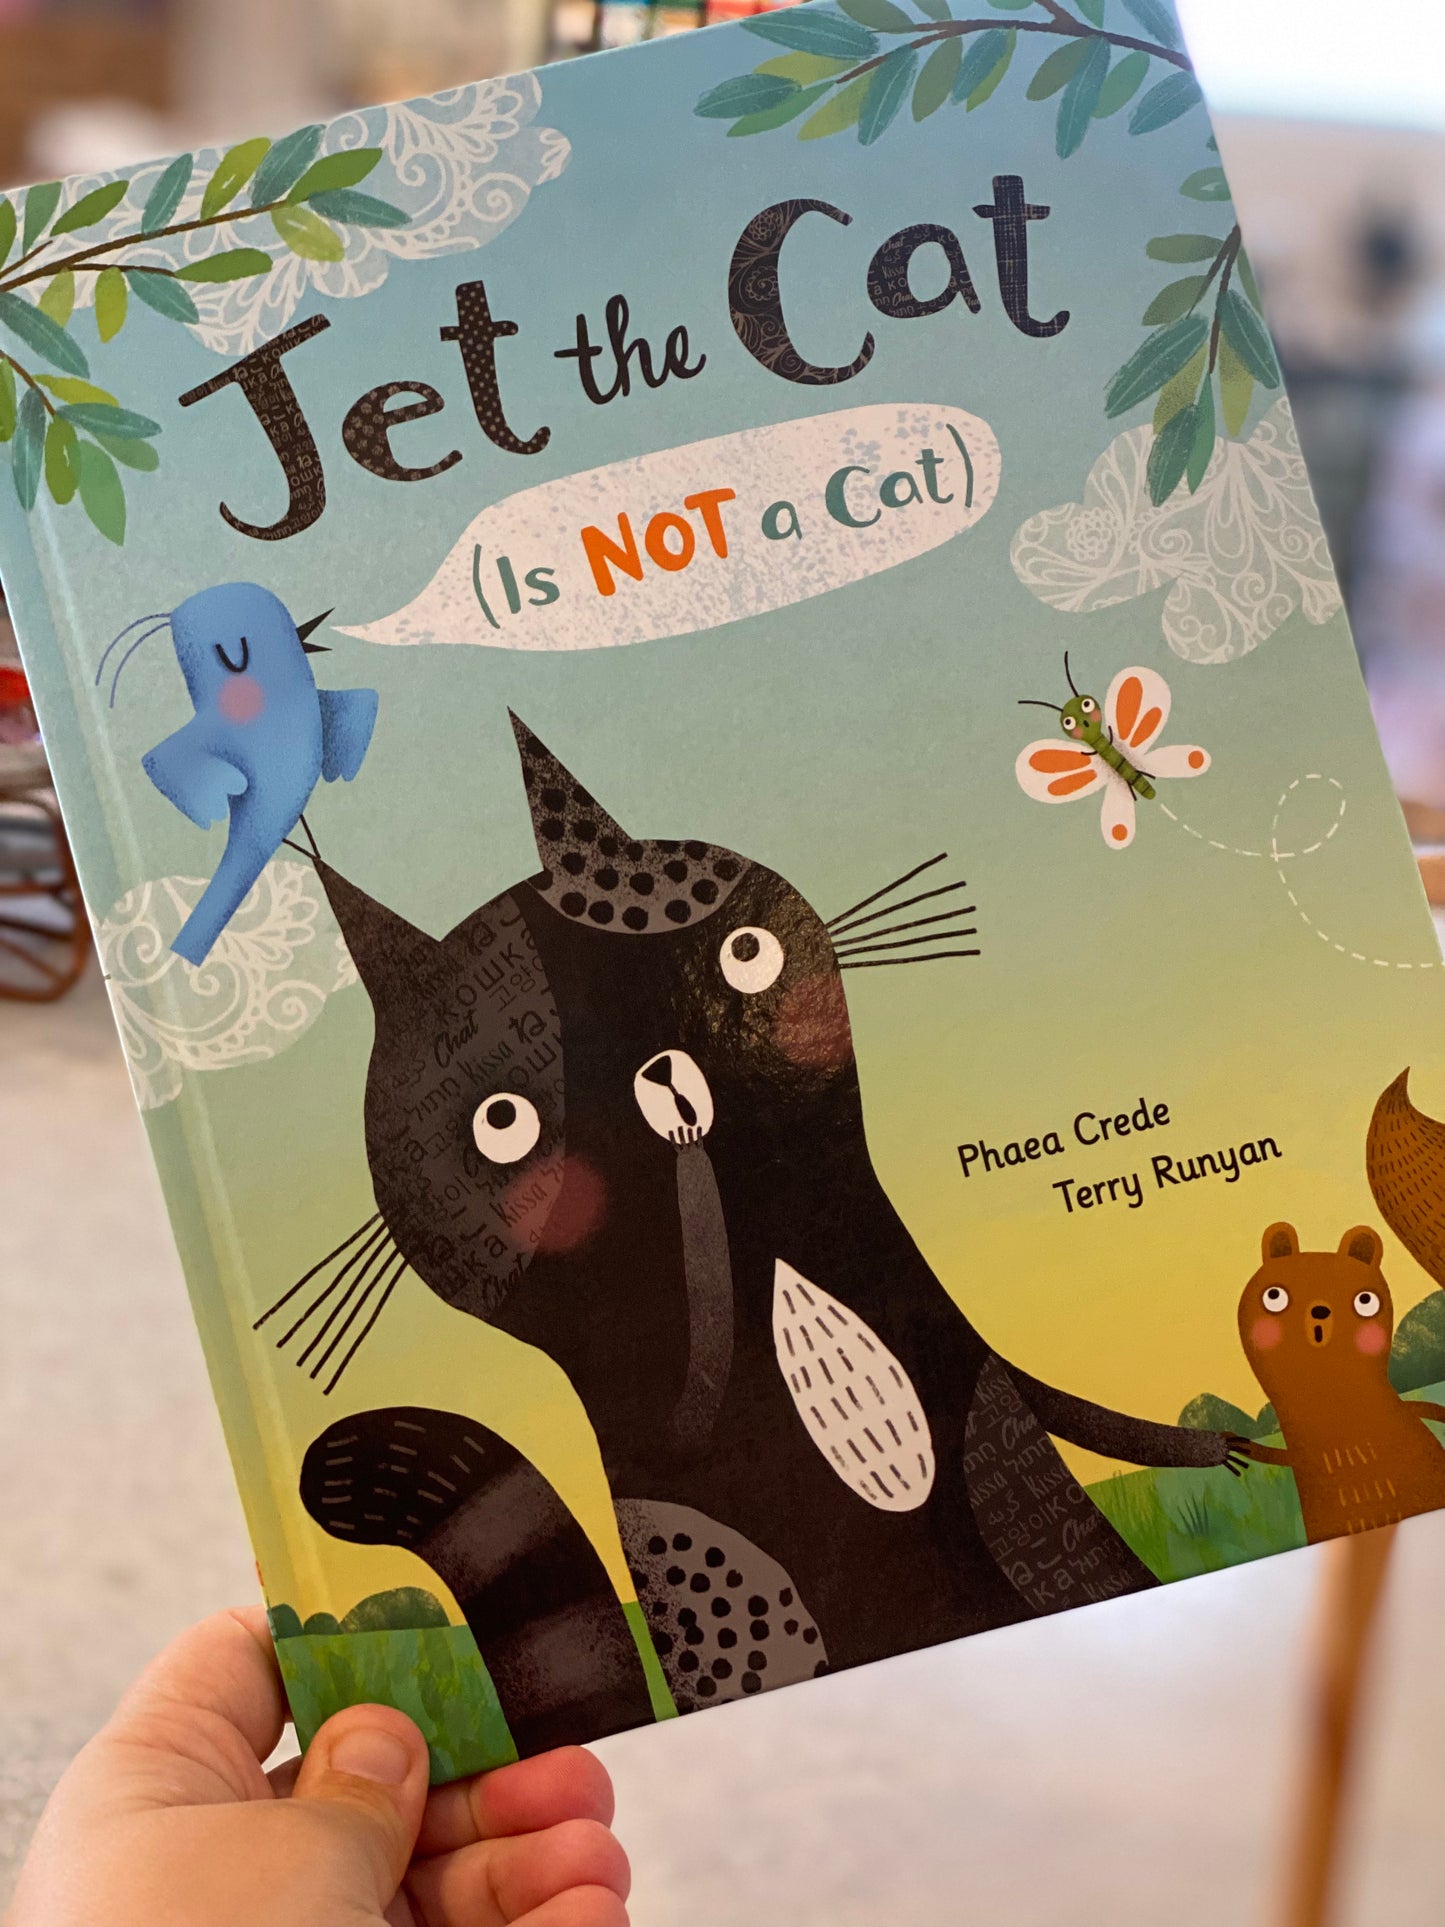 Jet the cat (is not a cat)